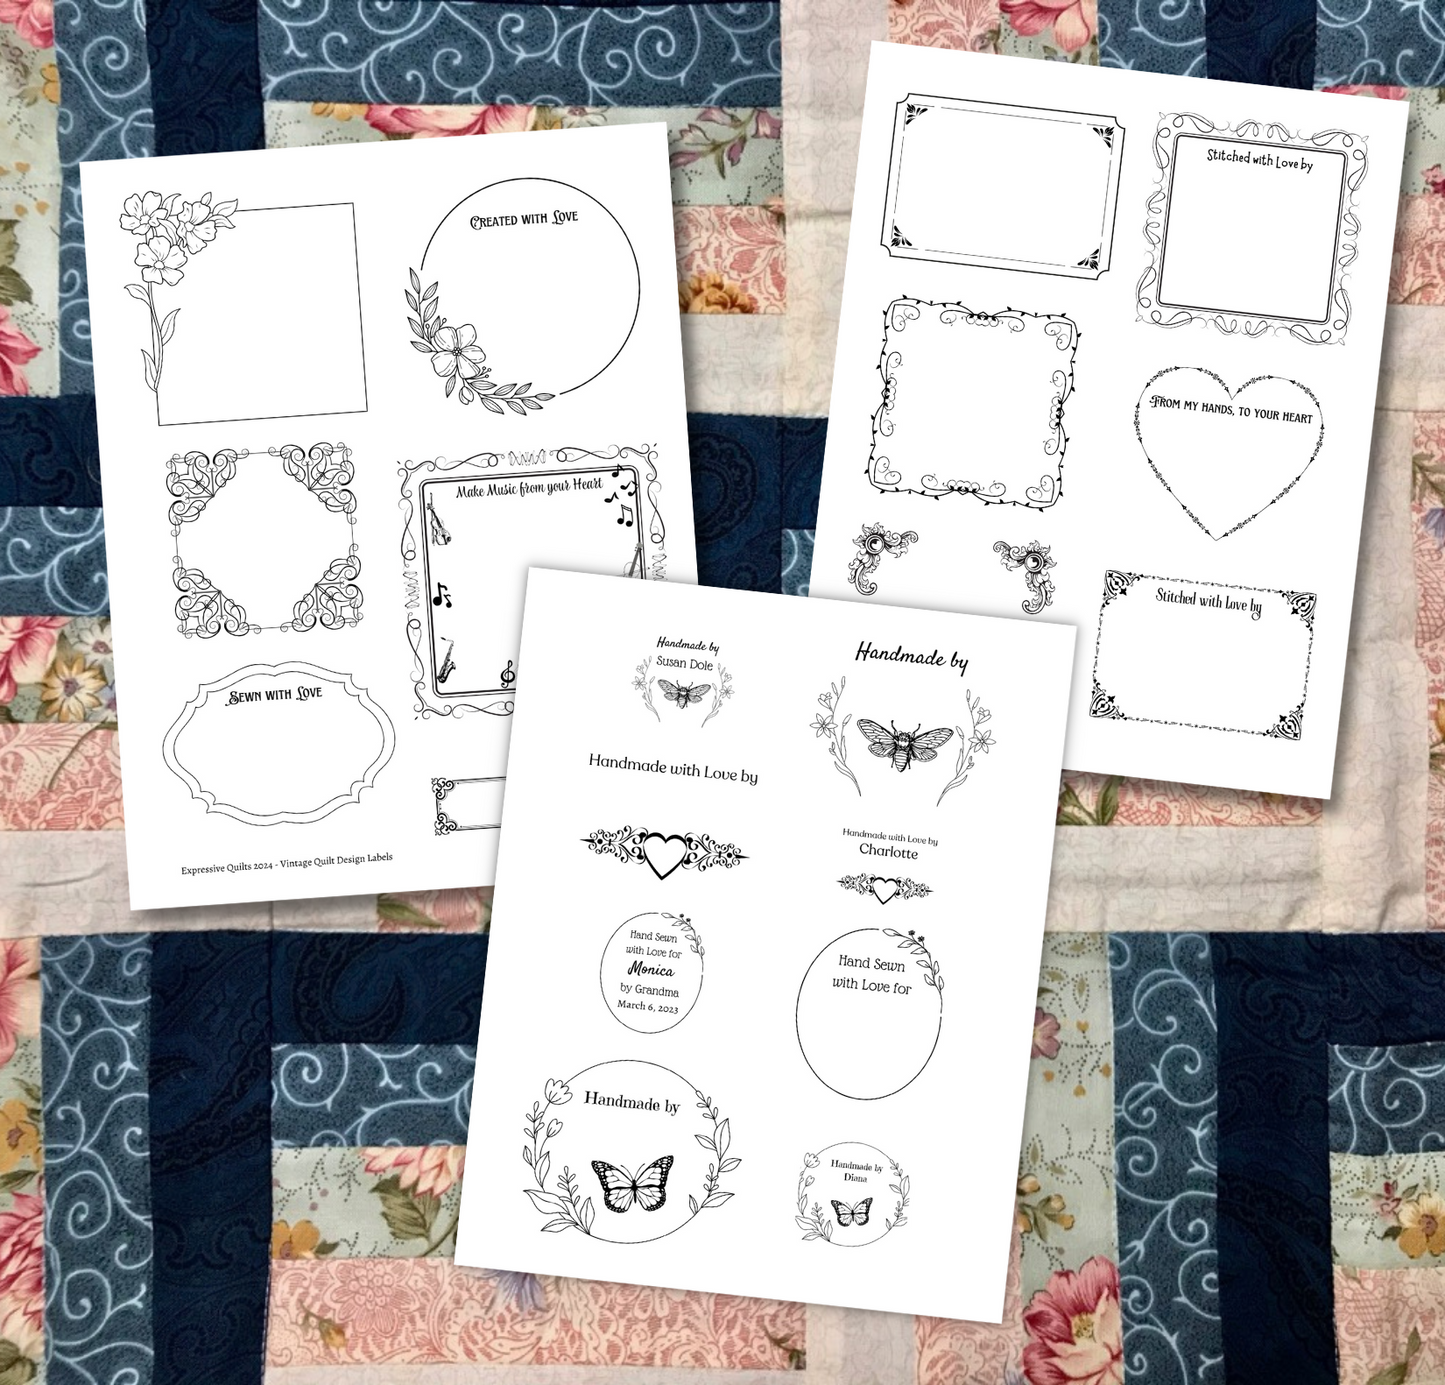 Vintage Victorian Quilt Label Designs are Printable to Fabric, a digital download Bundle - 6 Triangle Corner Labels - 35 approx approx 3.5 x 4 Labels